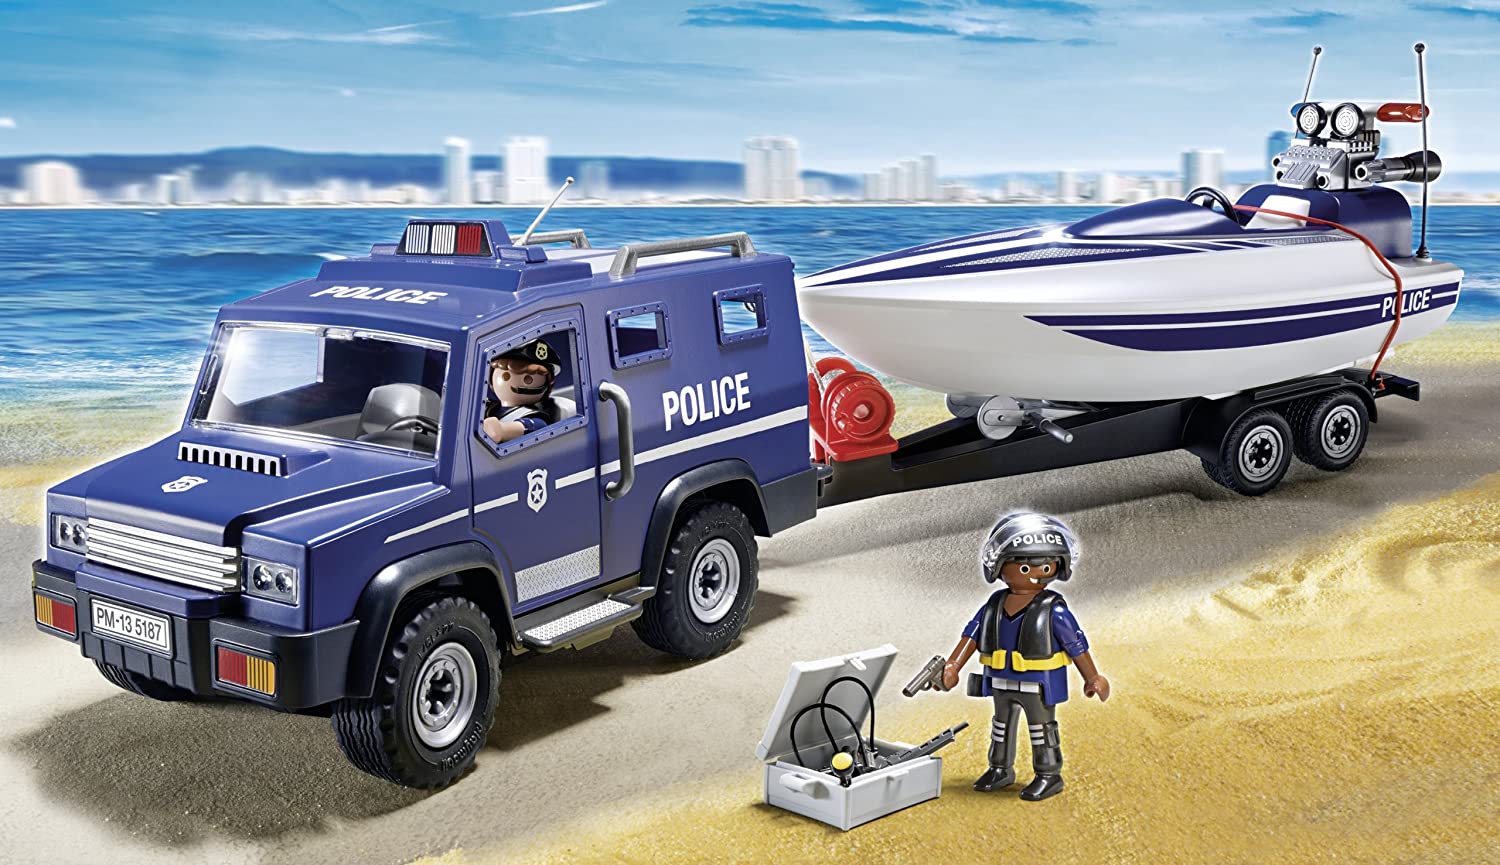 Playmobil Van And Boat, Buy Now, Store, 50% OFF,